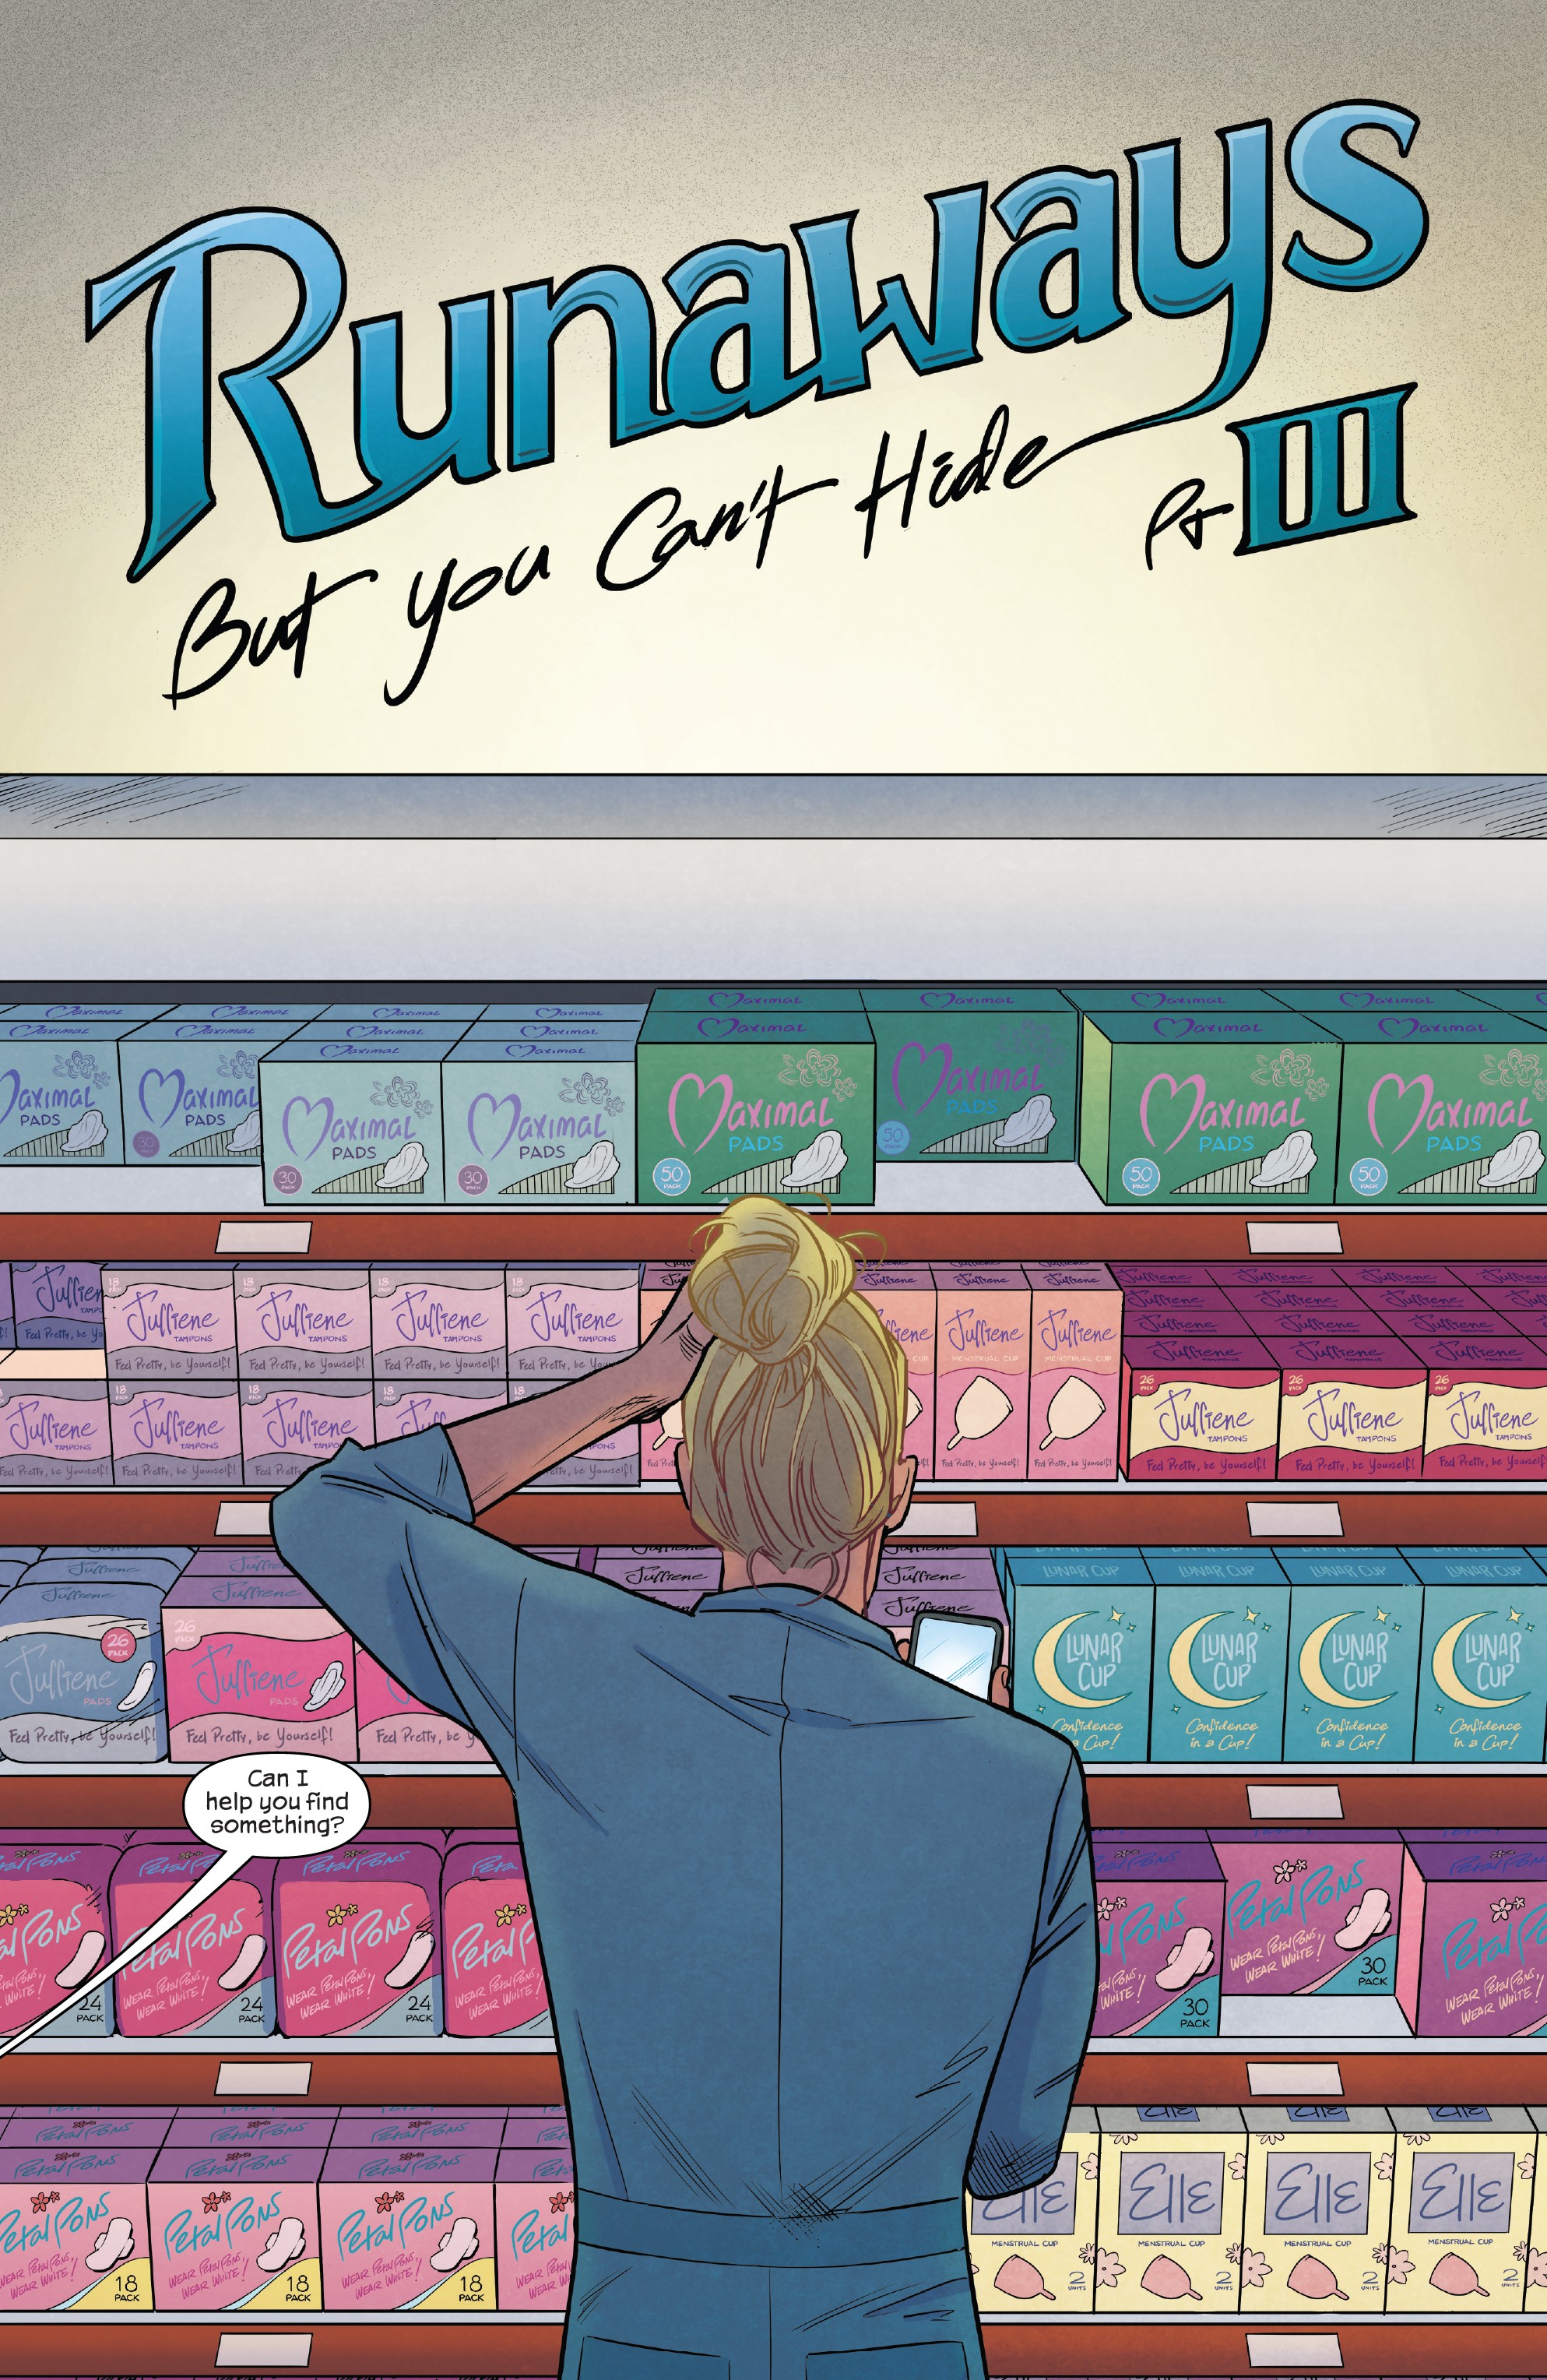 Runaways (2017-): Chapter 21 - Page 3